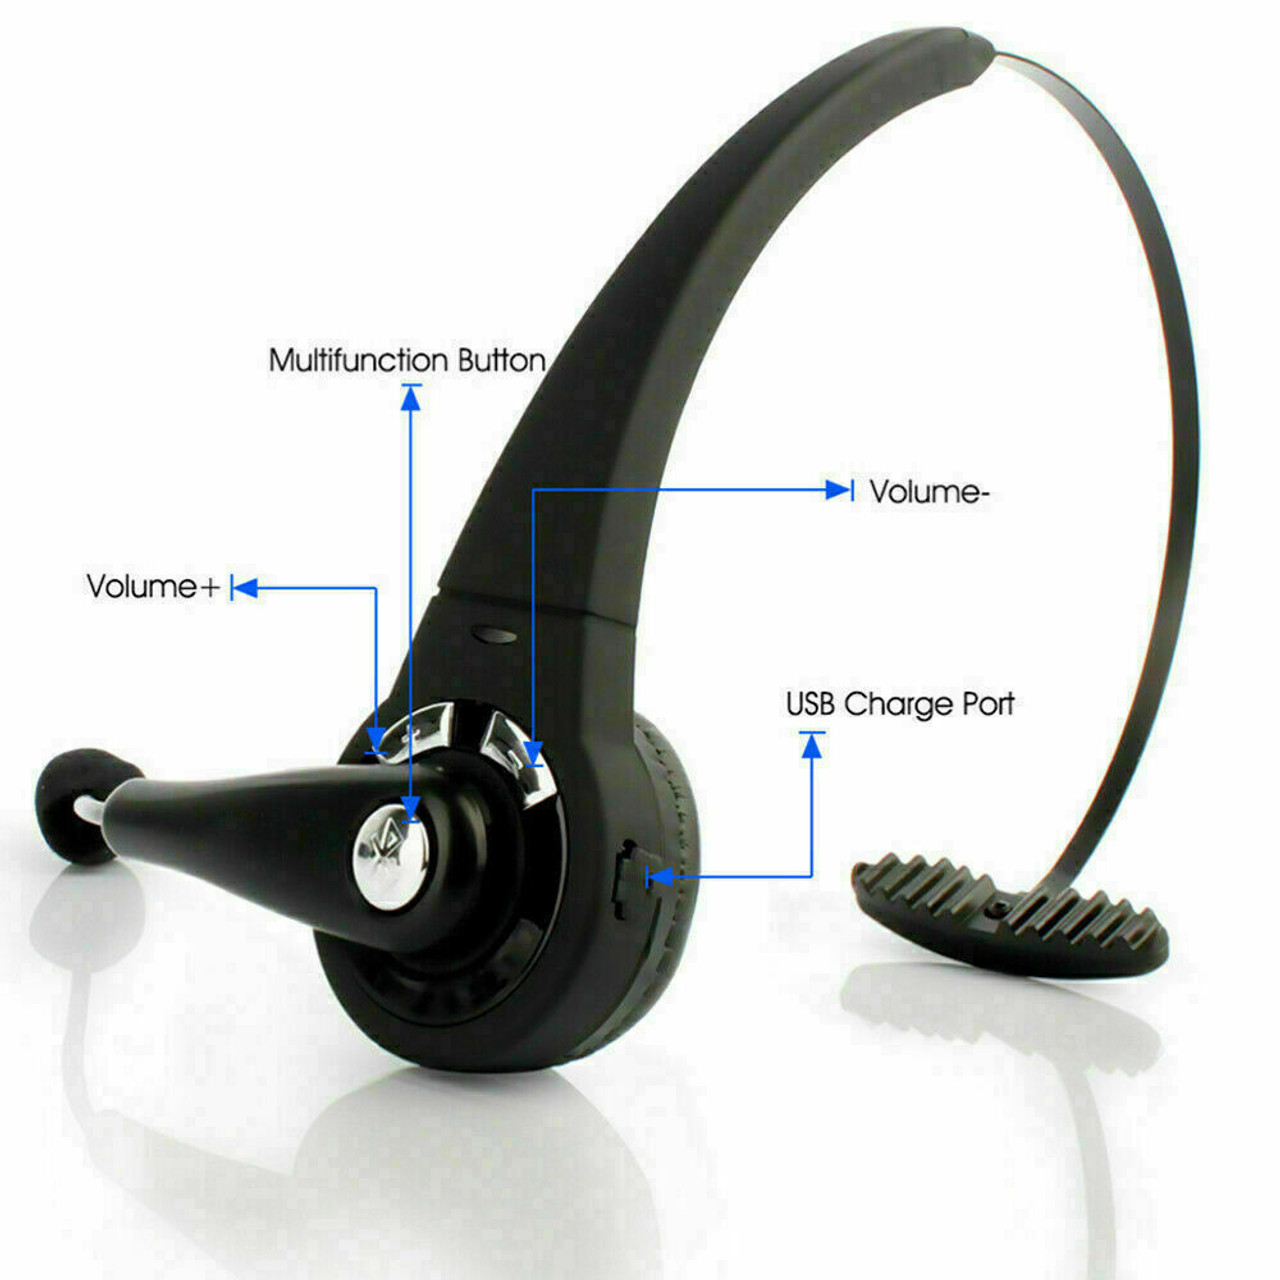 Noise Cancelling Wireless Bluetooth Headset Over the Head Boom w/Mic For Trucker